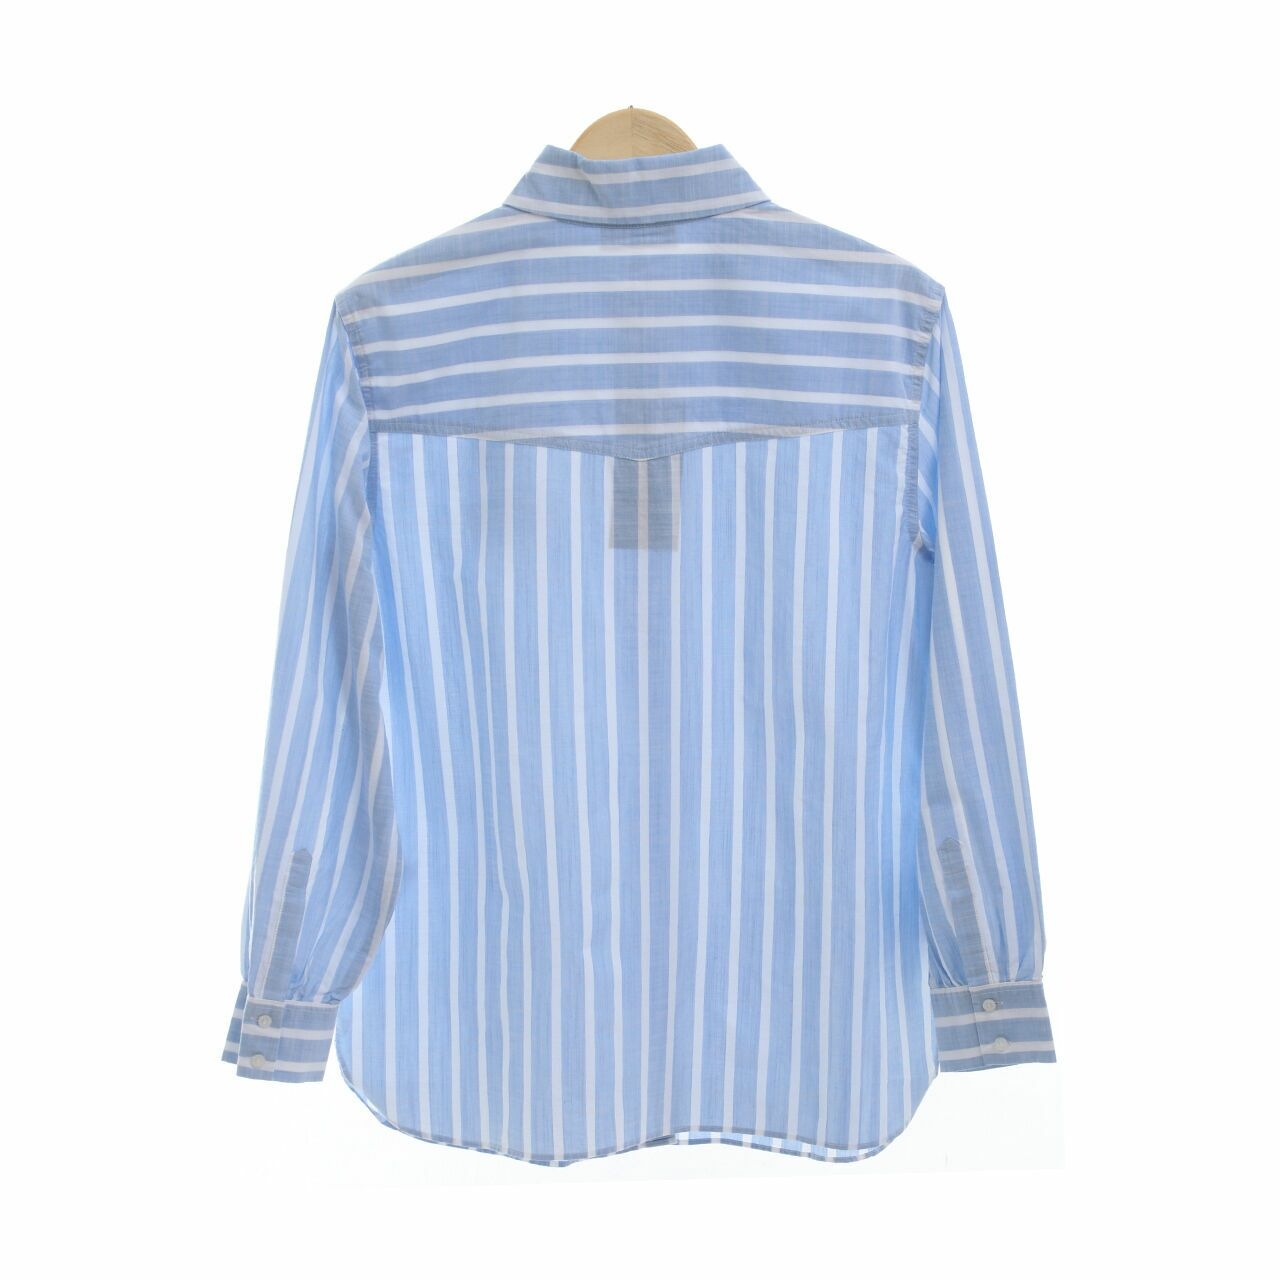 Karl Lagerfeld Stripes Blue with Patch Shirt 